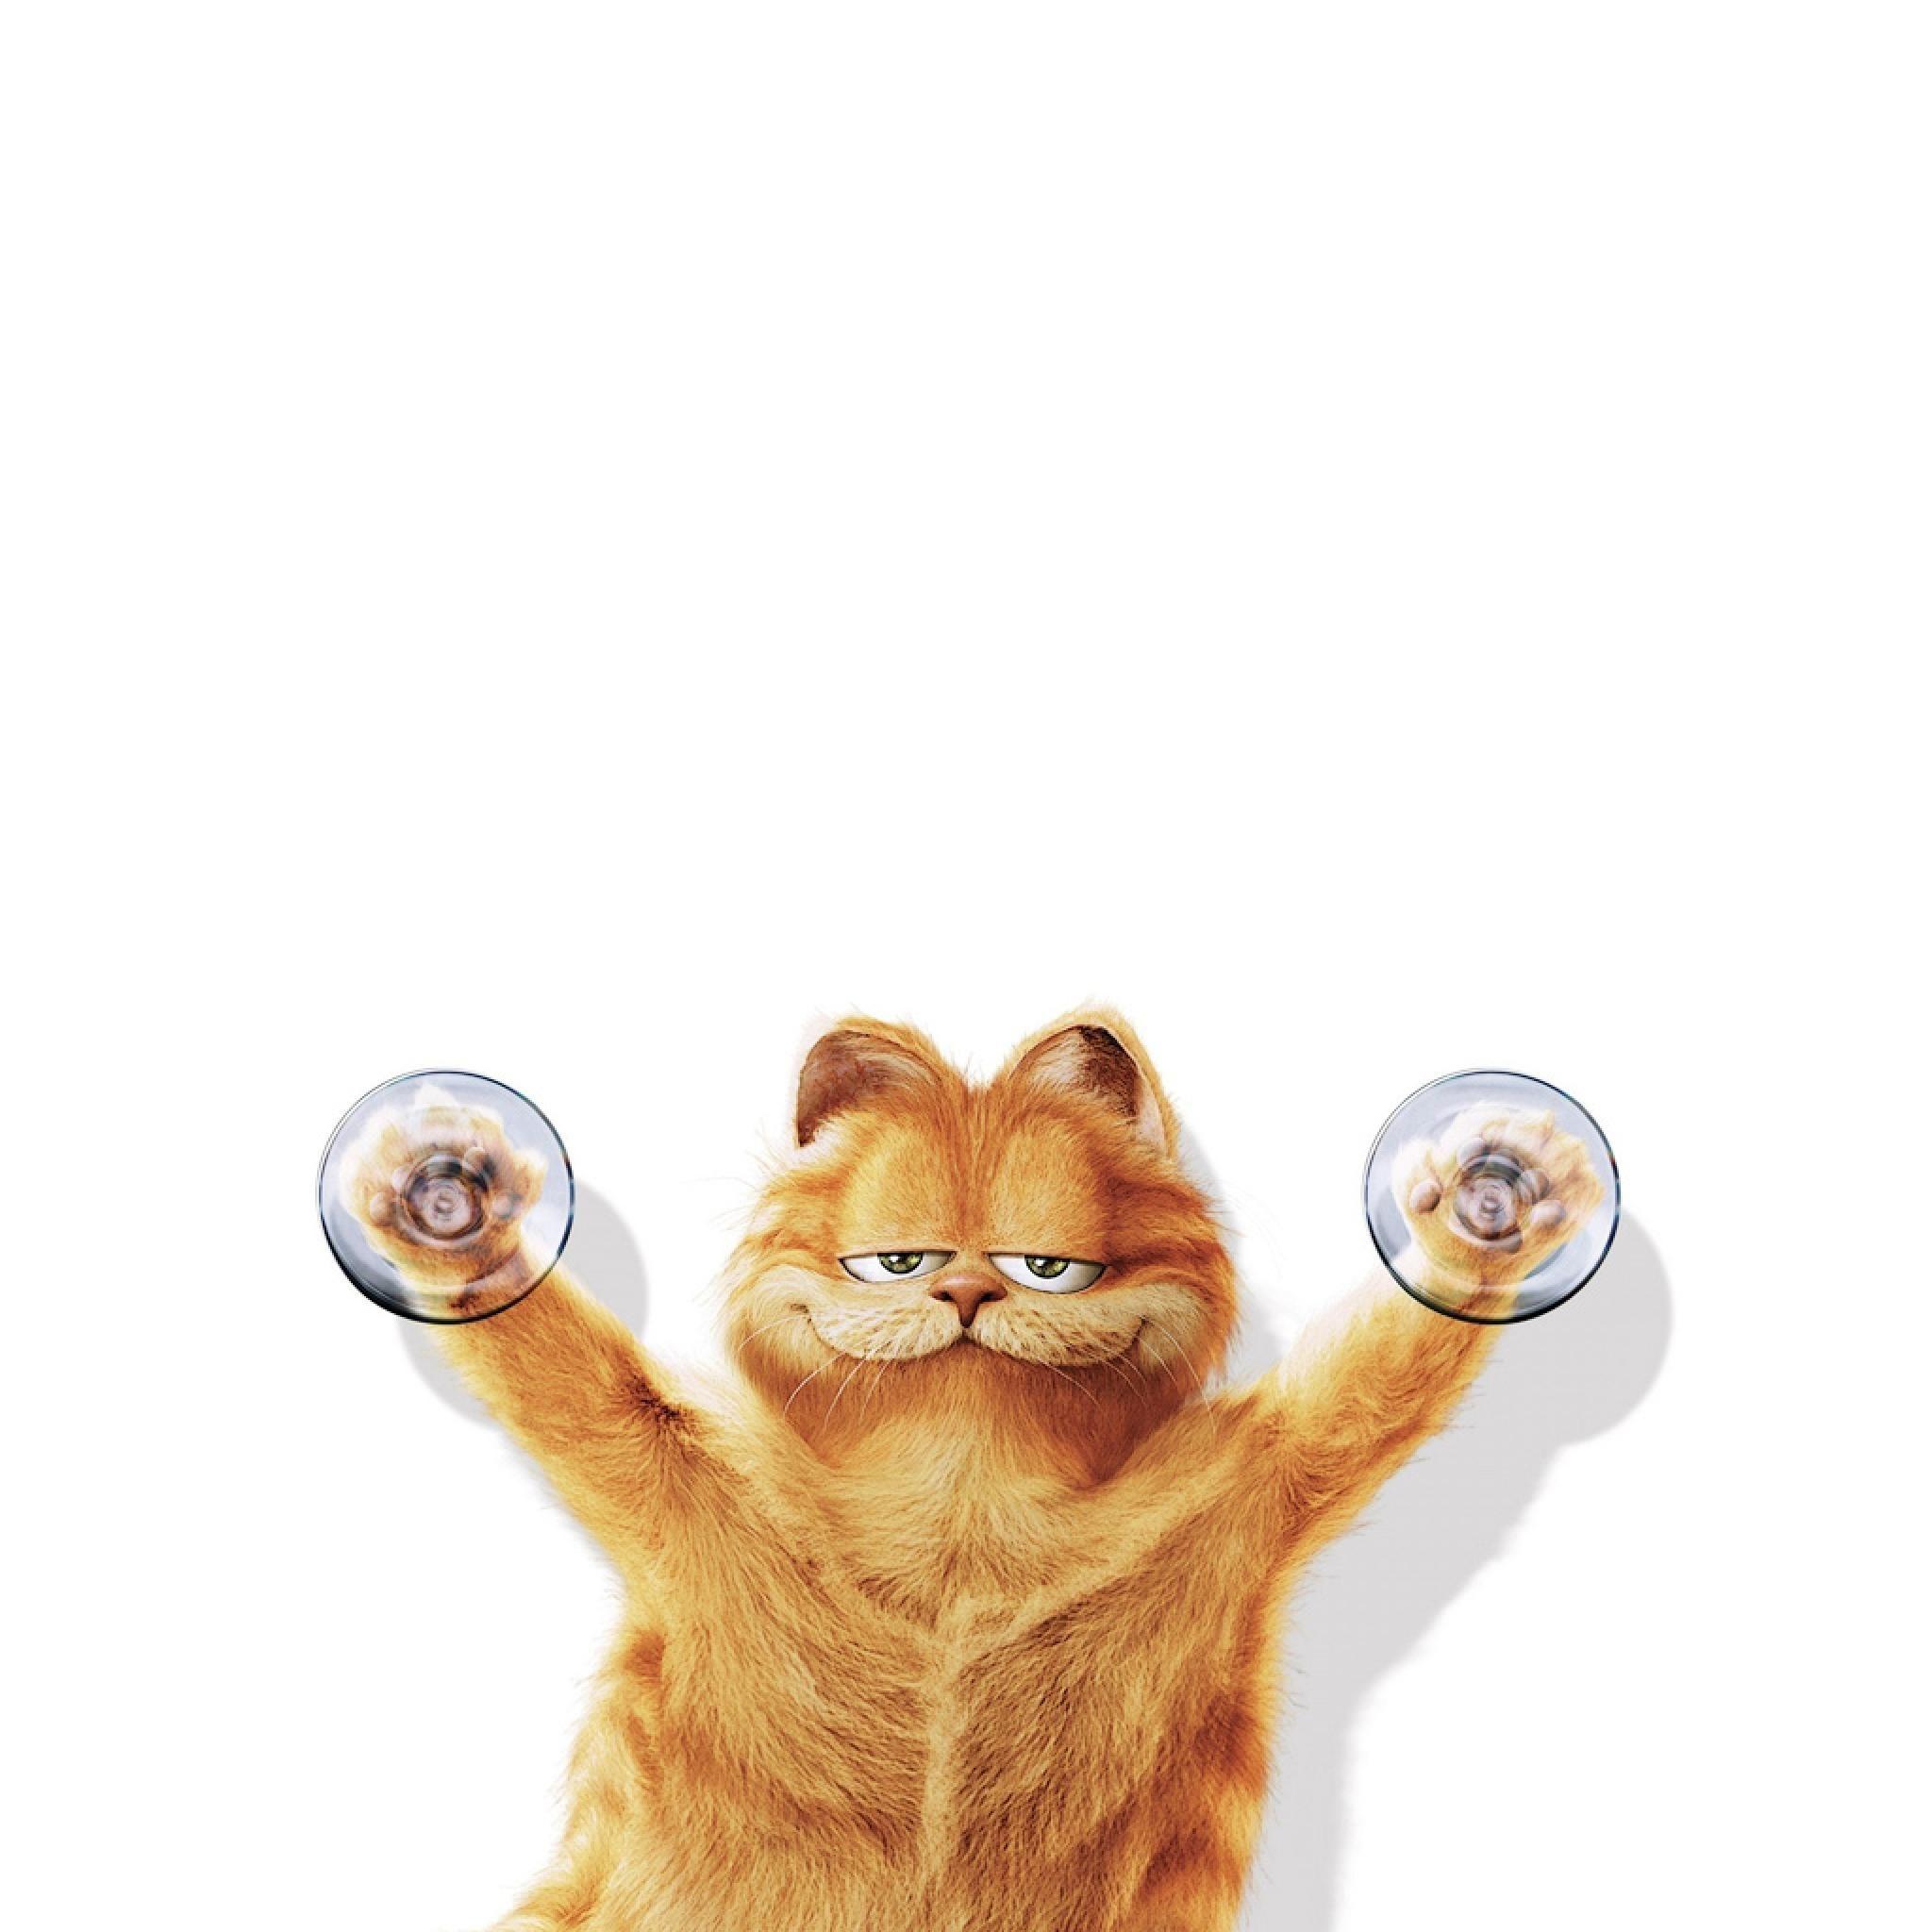 Fun Humor And Lazy But Kind Cat Garfield IPhone HD